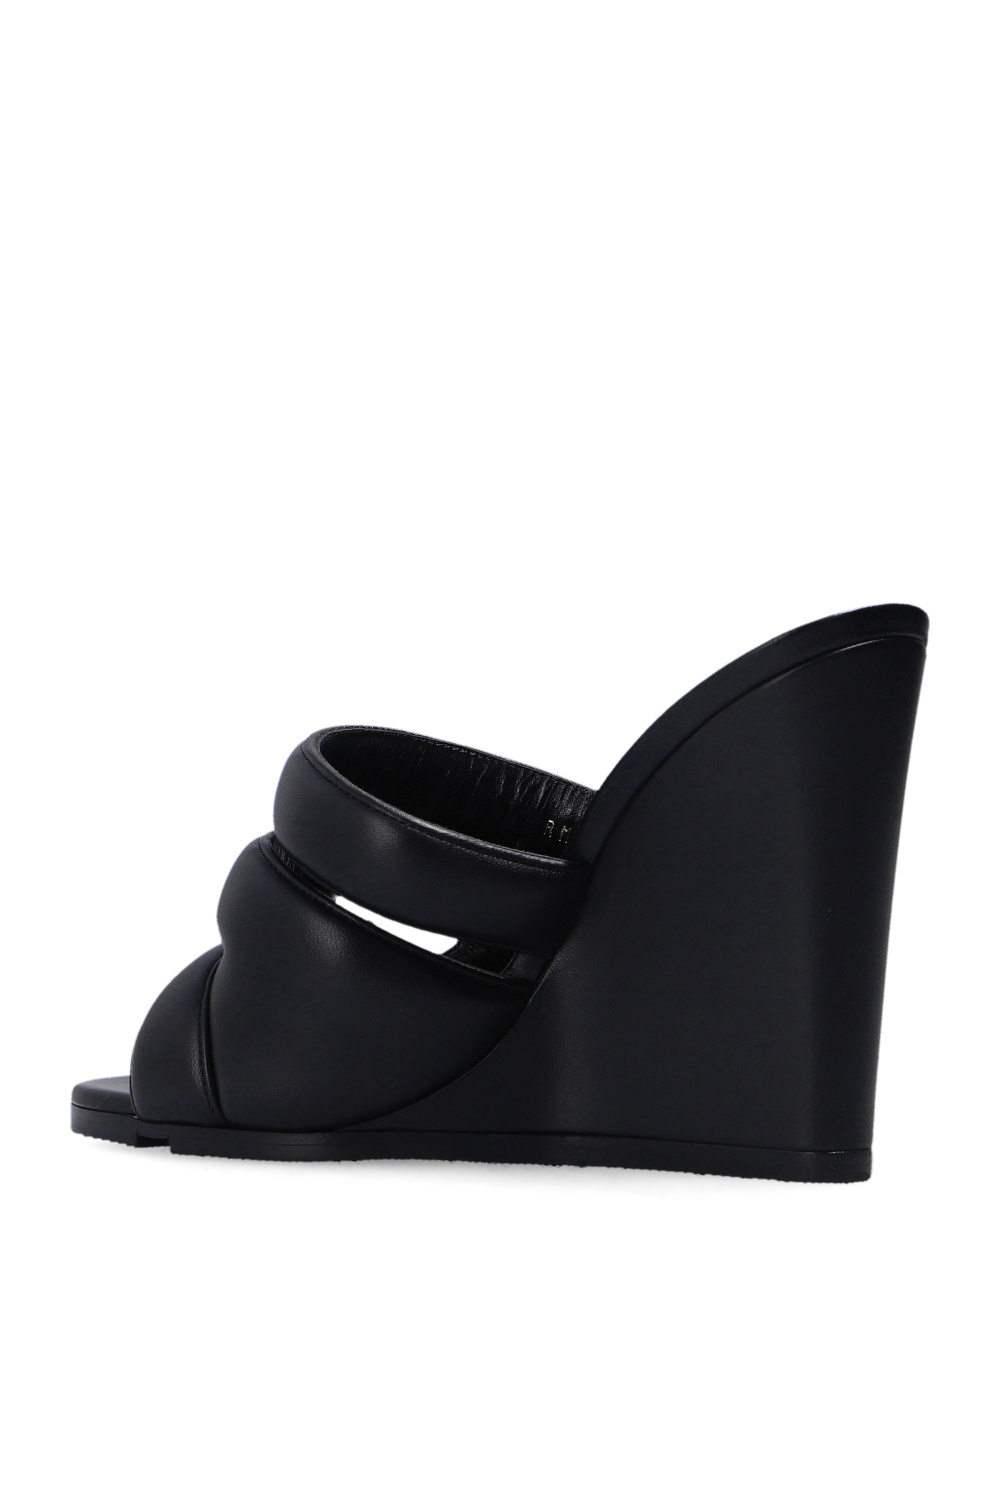 Givenchy ‘G’ wedge mules